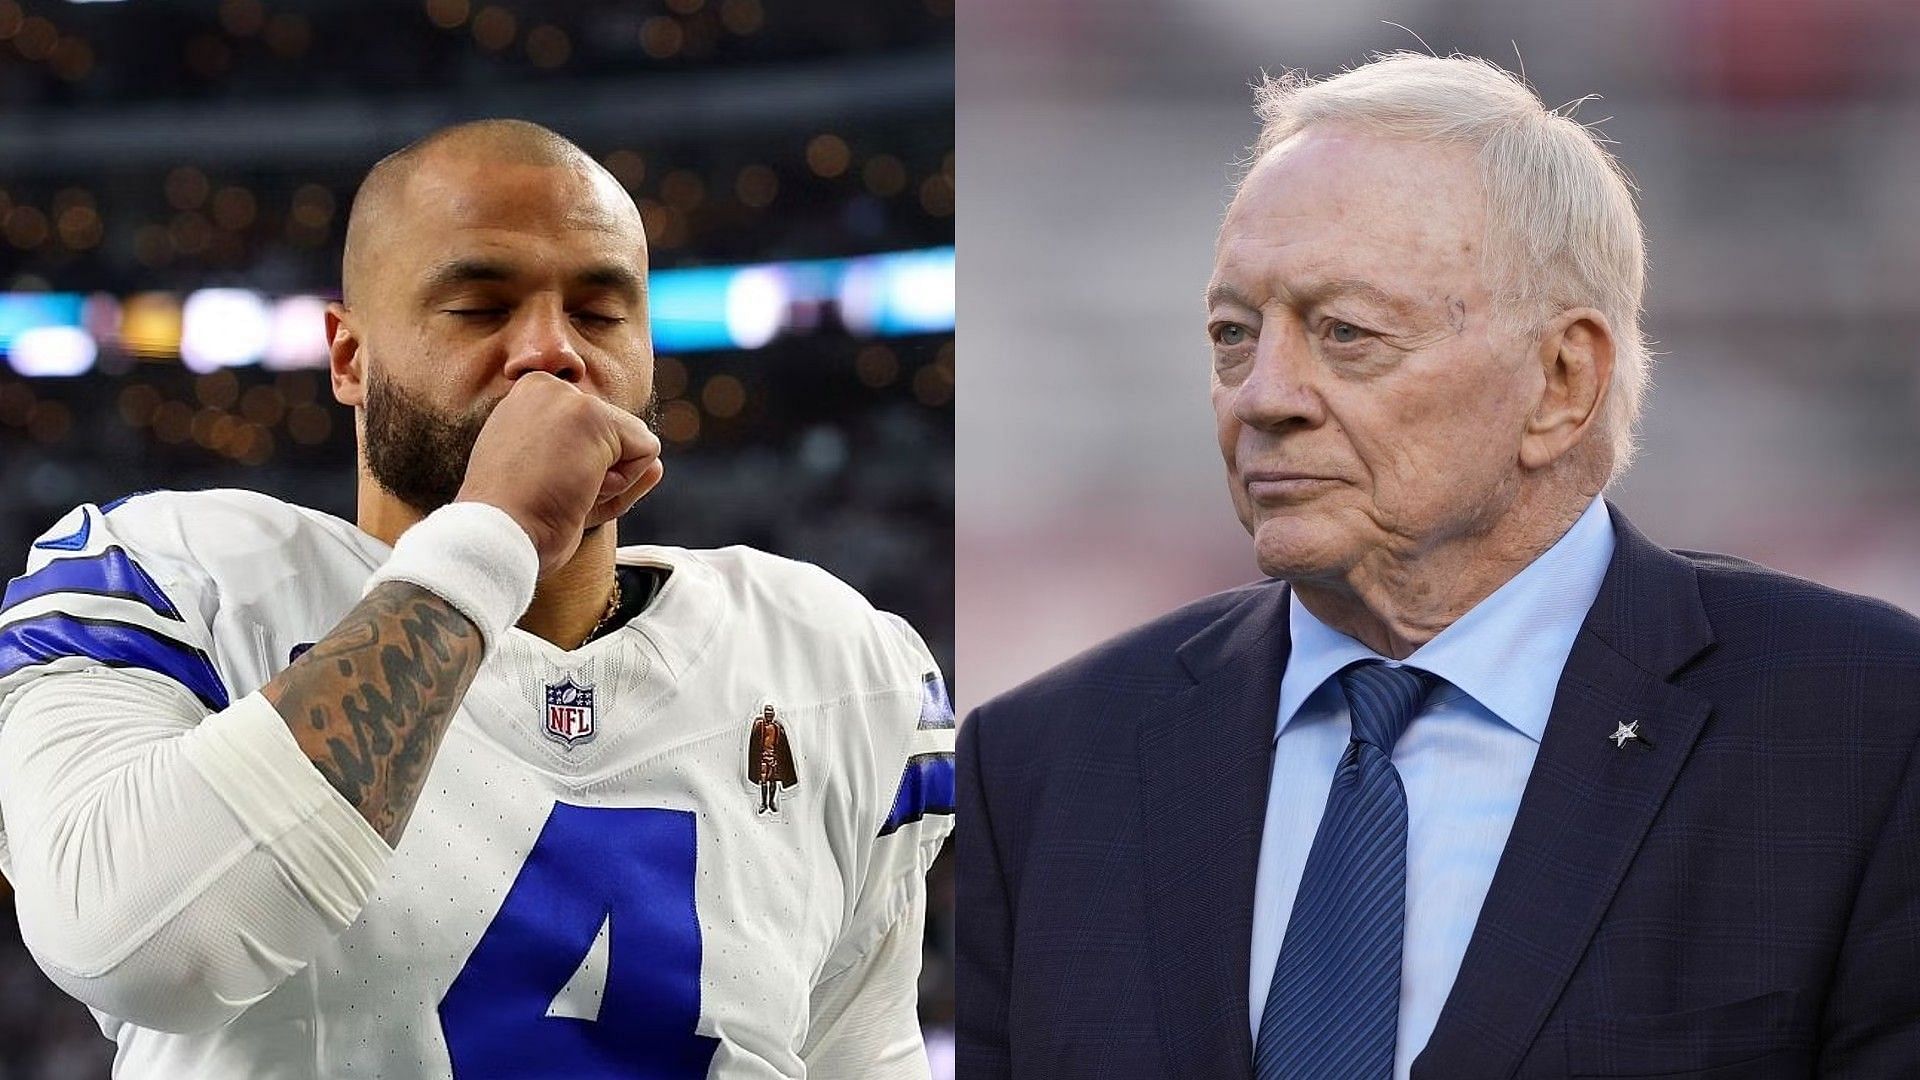 Super Bowl or free agency: NFL analyst claims there are only two outcomes for Dak Prescott as Jerry Jones continues to drag out negotiations